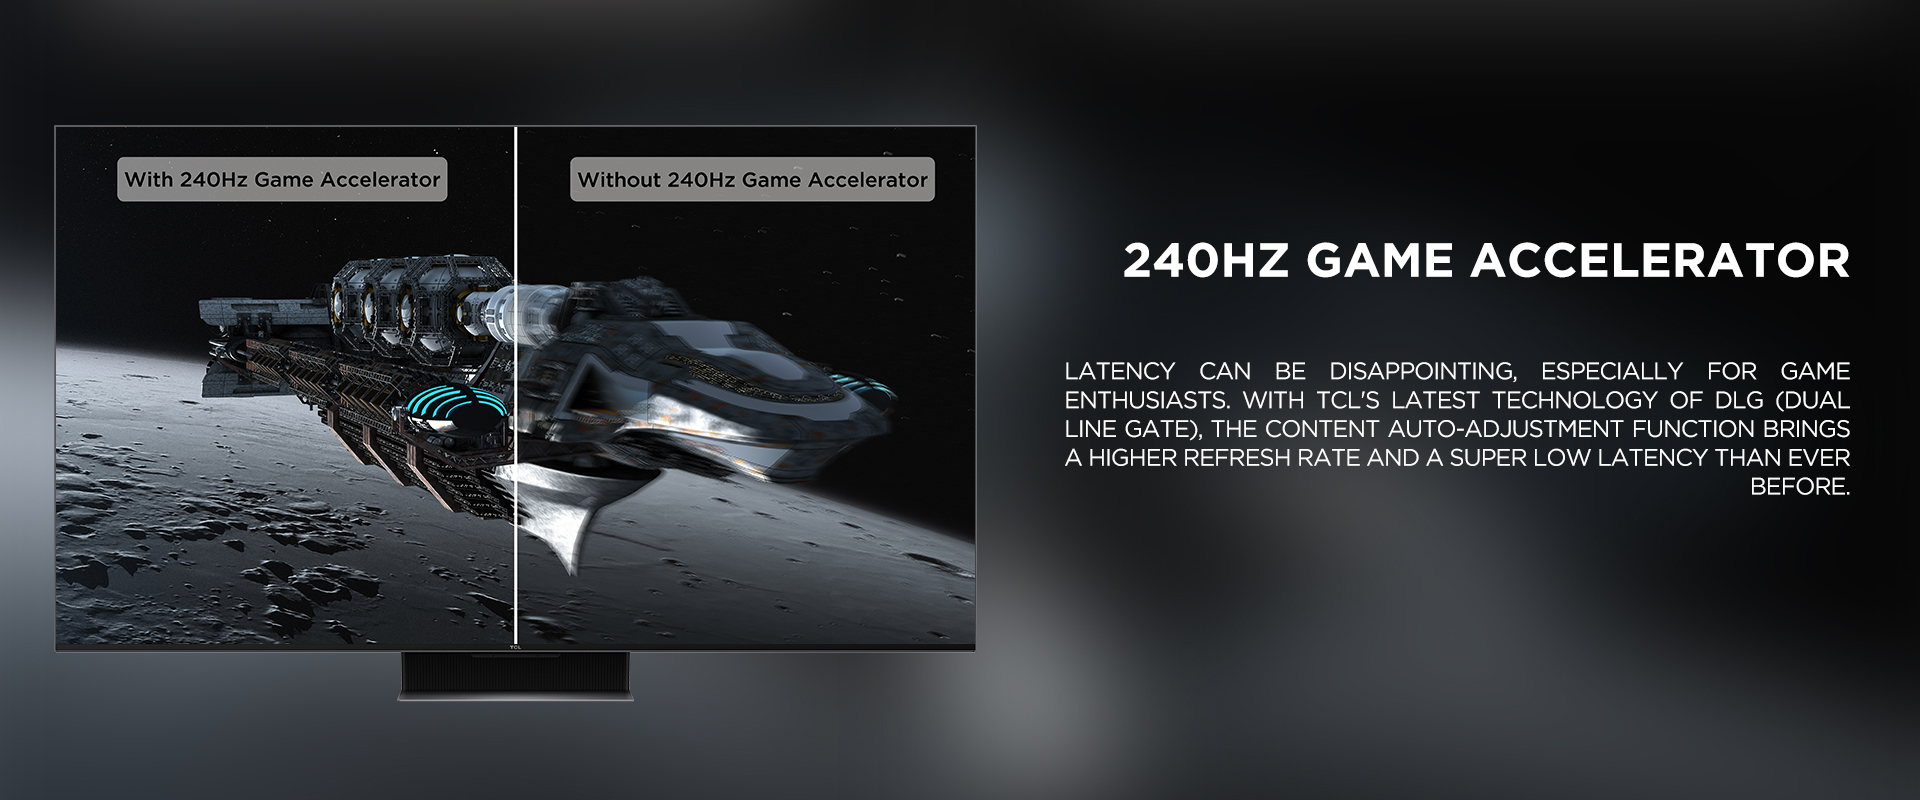 240Hz Game Accelerator - Latency can be disappointing, especially for game enthusiasts. With TCL's latest technology of DLG (Dual Line Gate), the content auto-adjustment function brings a higher refresh rate and a super low latency than ever before.